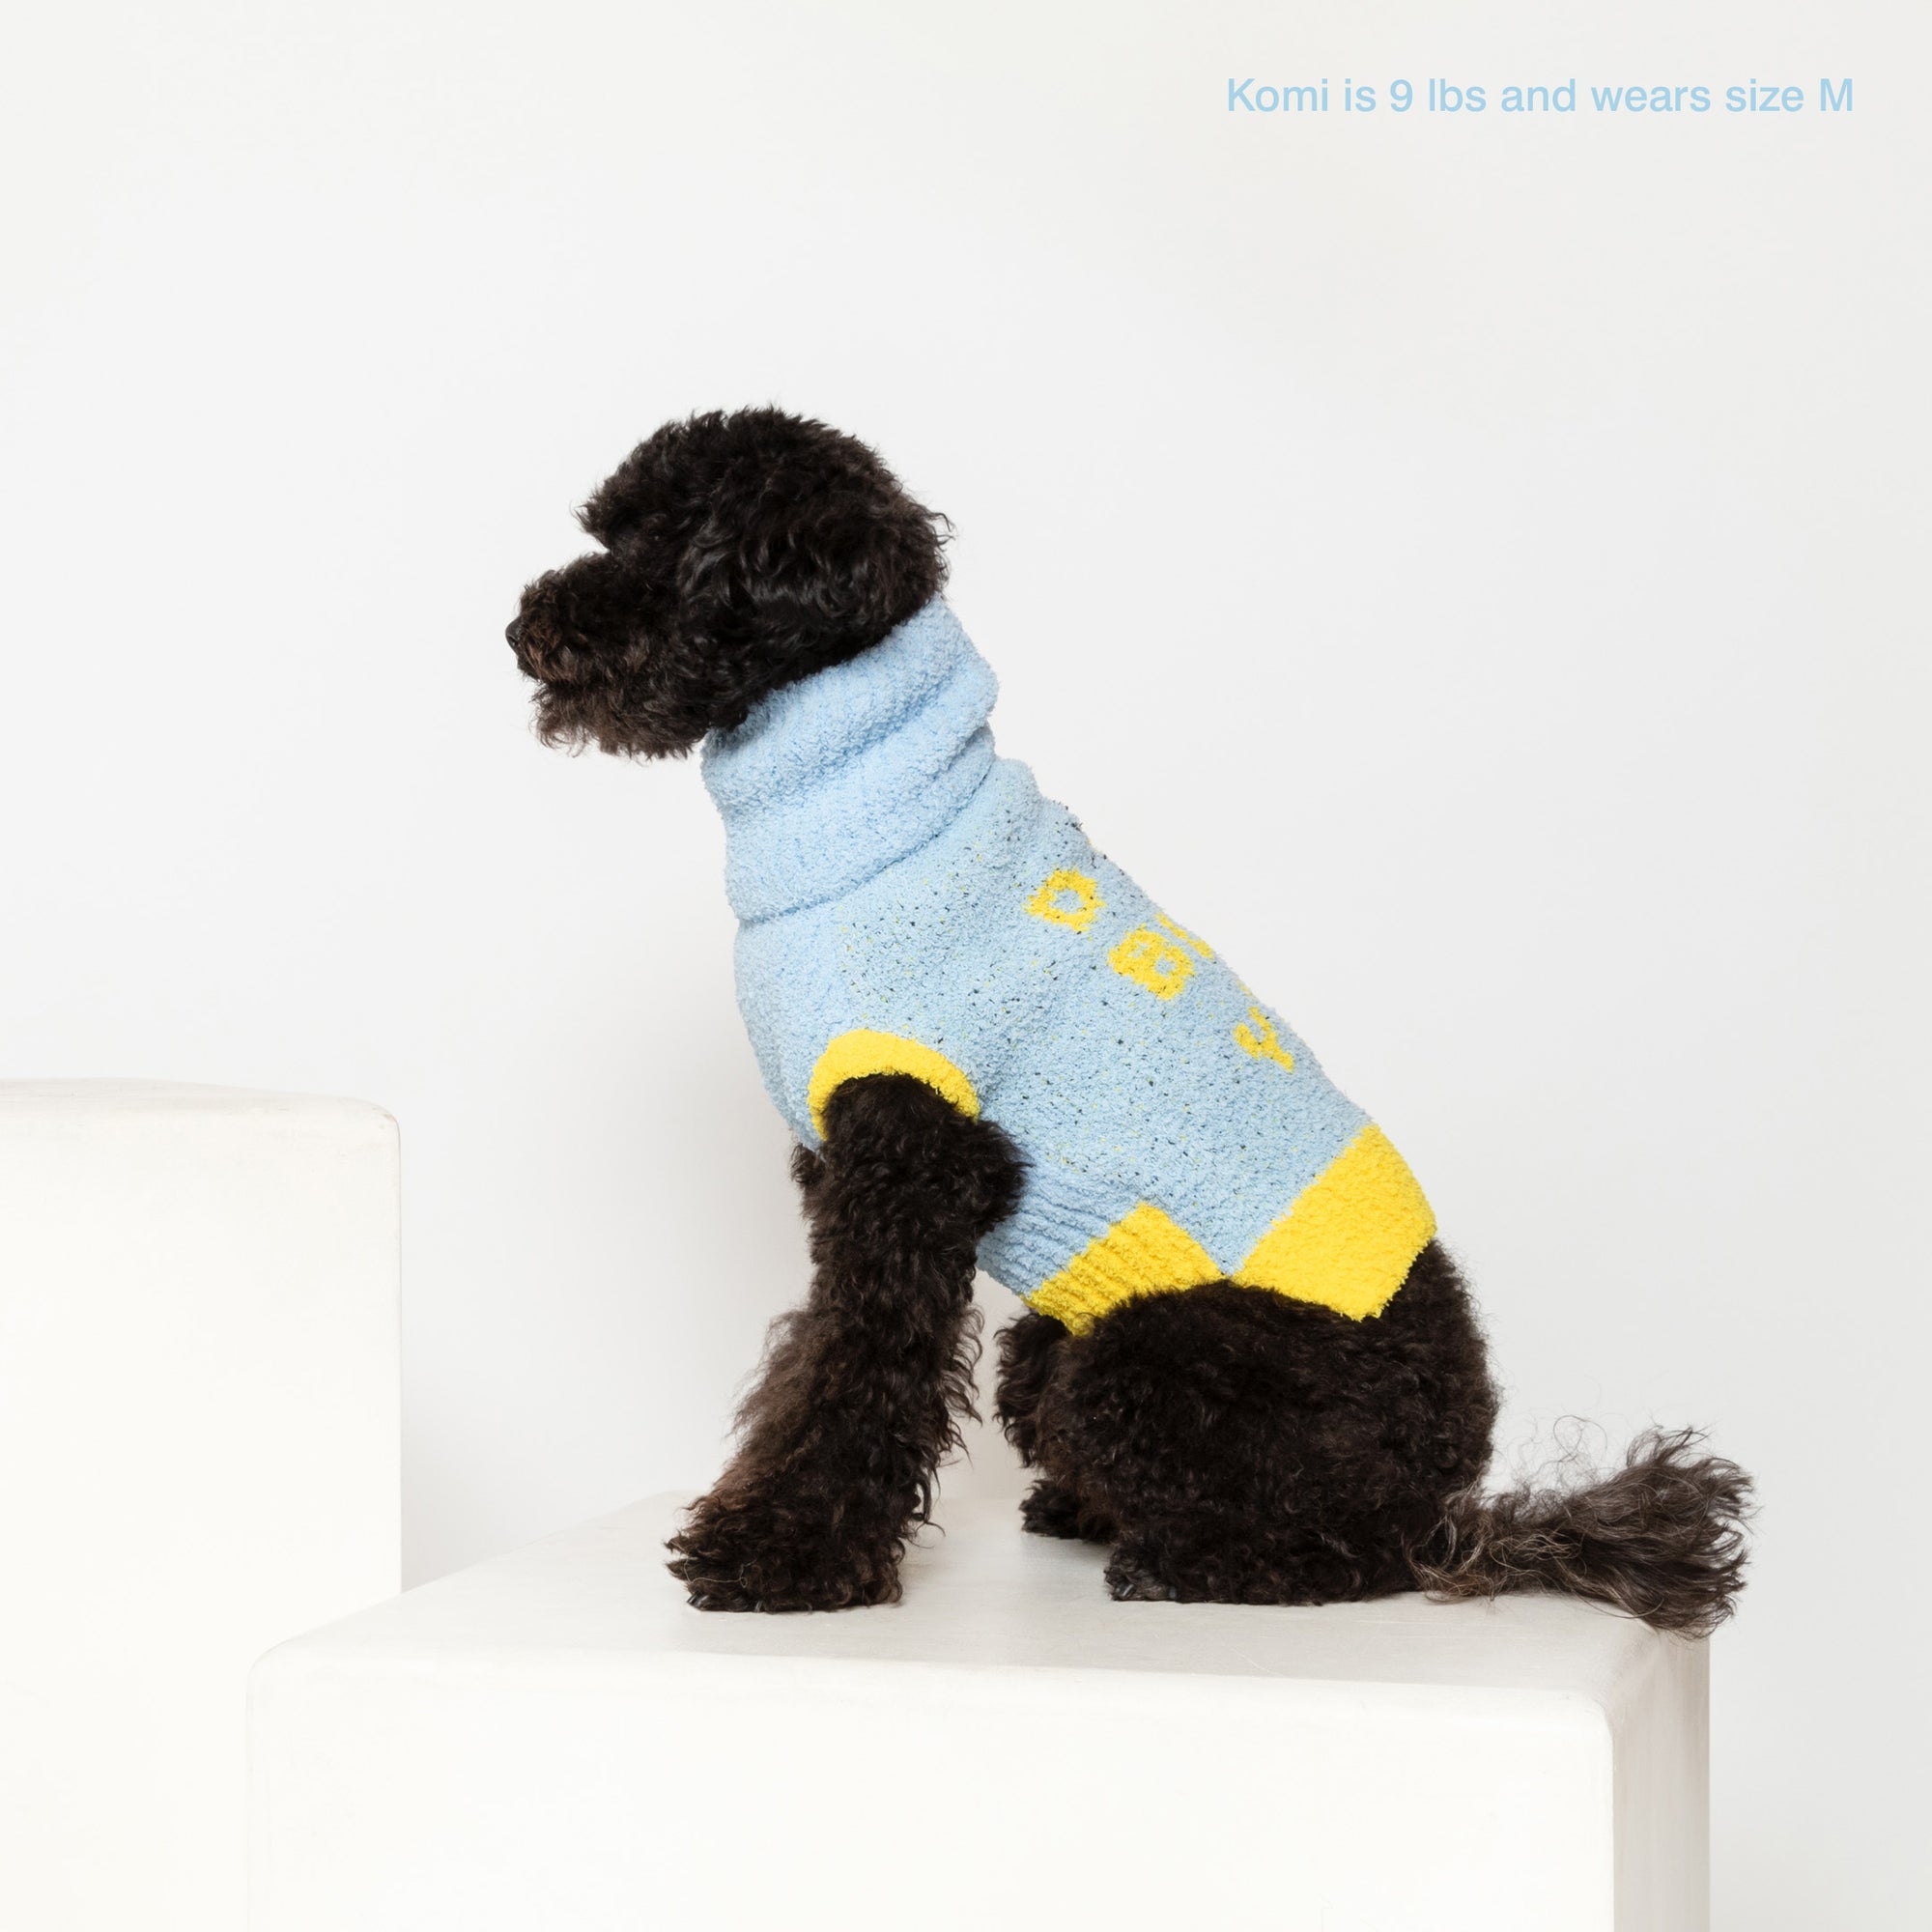  Black poodle named Komi, 9 lbs, in a medium-sized blue "The Furryfolks" sweater, on a white pedestal.